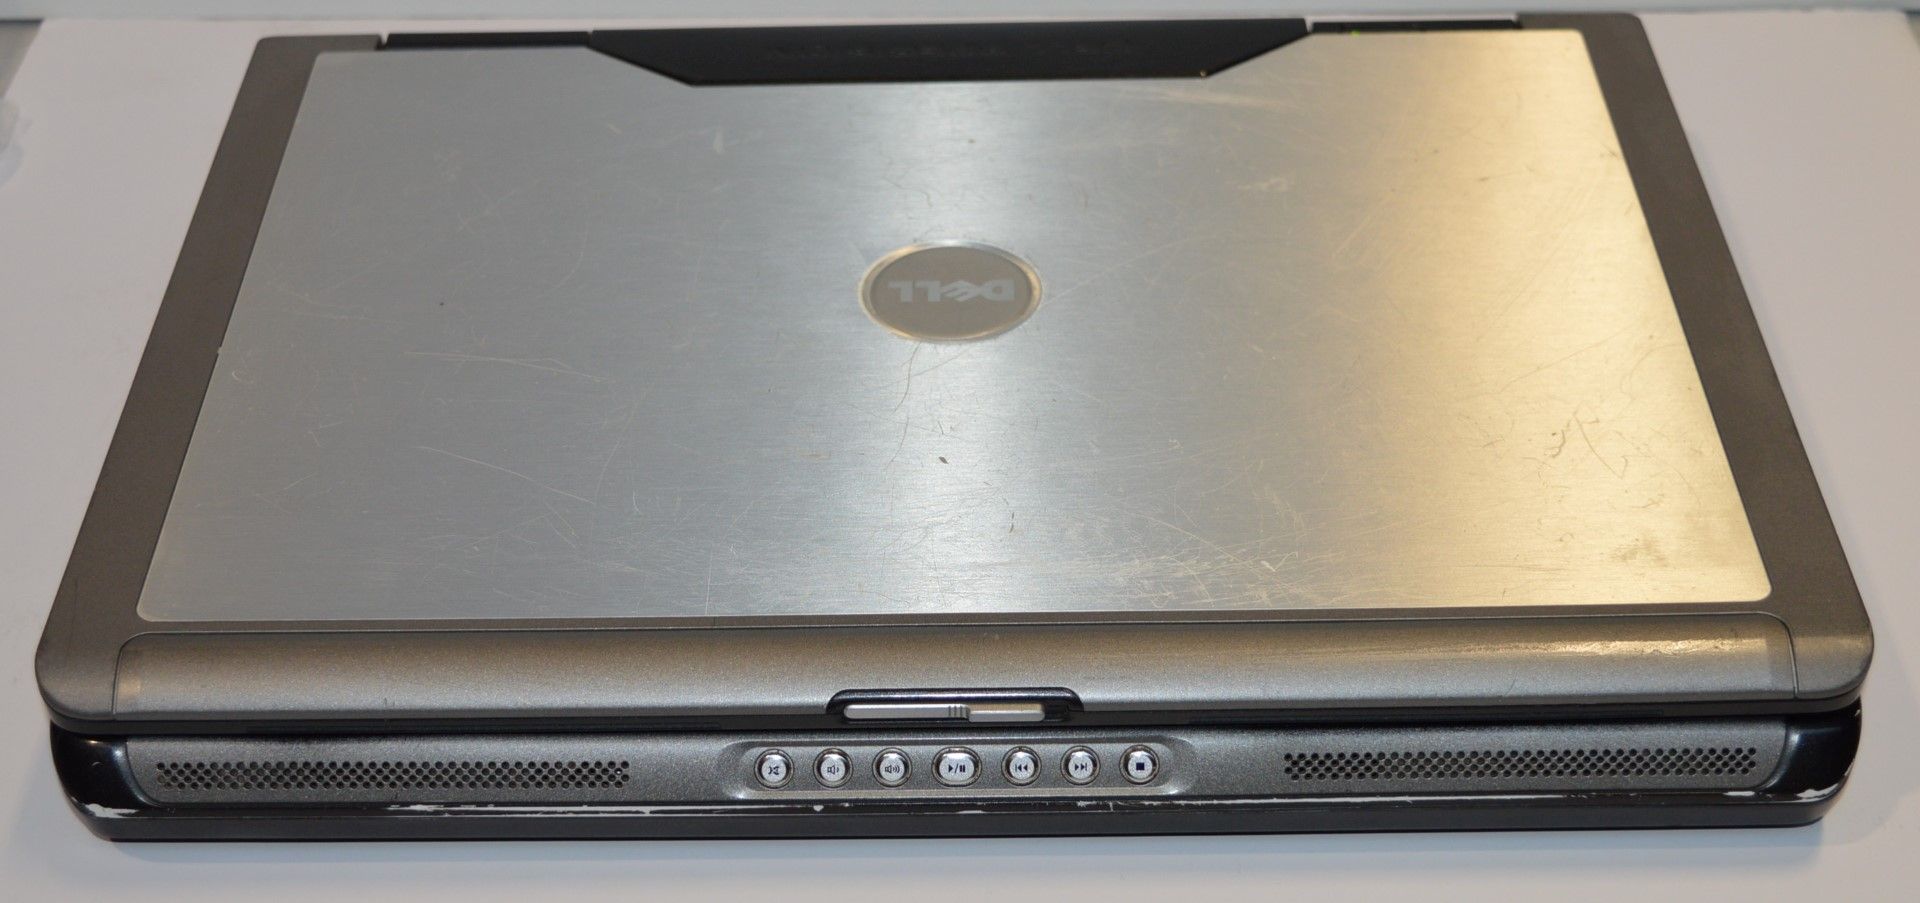 1 x Dell M90 17 Inch Laptop Computer - Features an Intel Core 2 Duo 2.16ghz Processor, 160gb Hard - Image 7 of 12